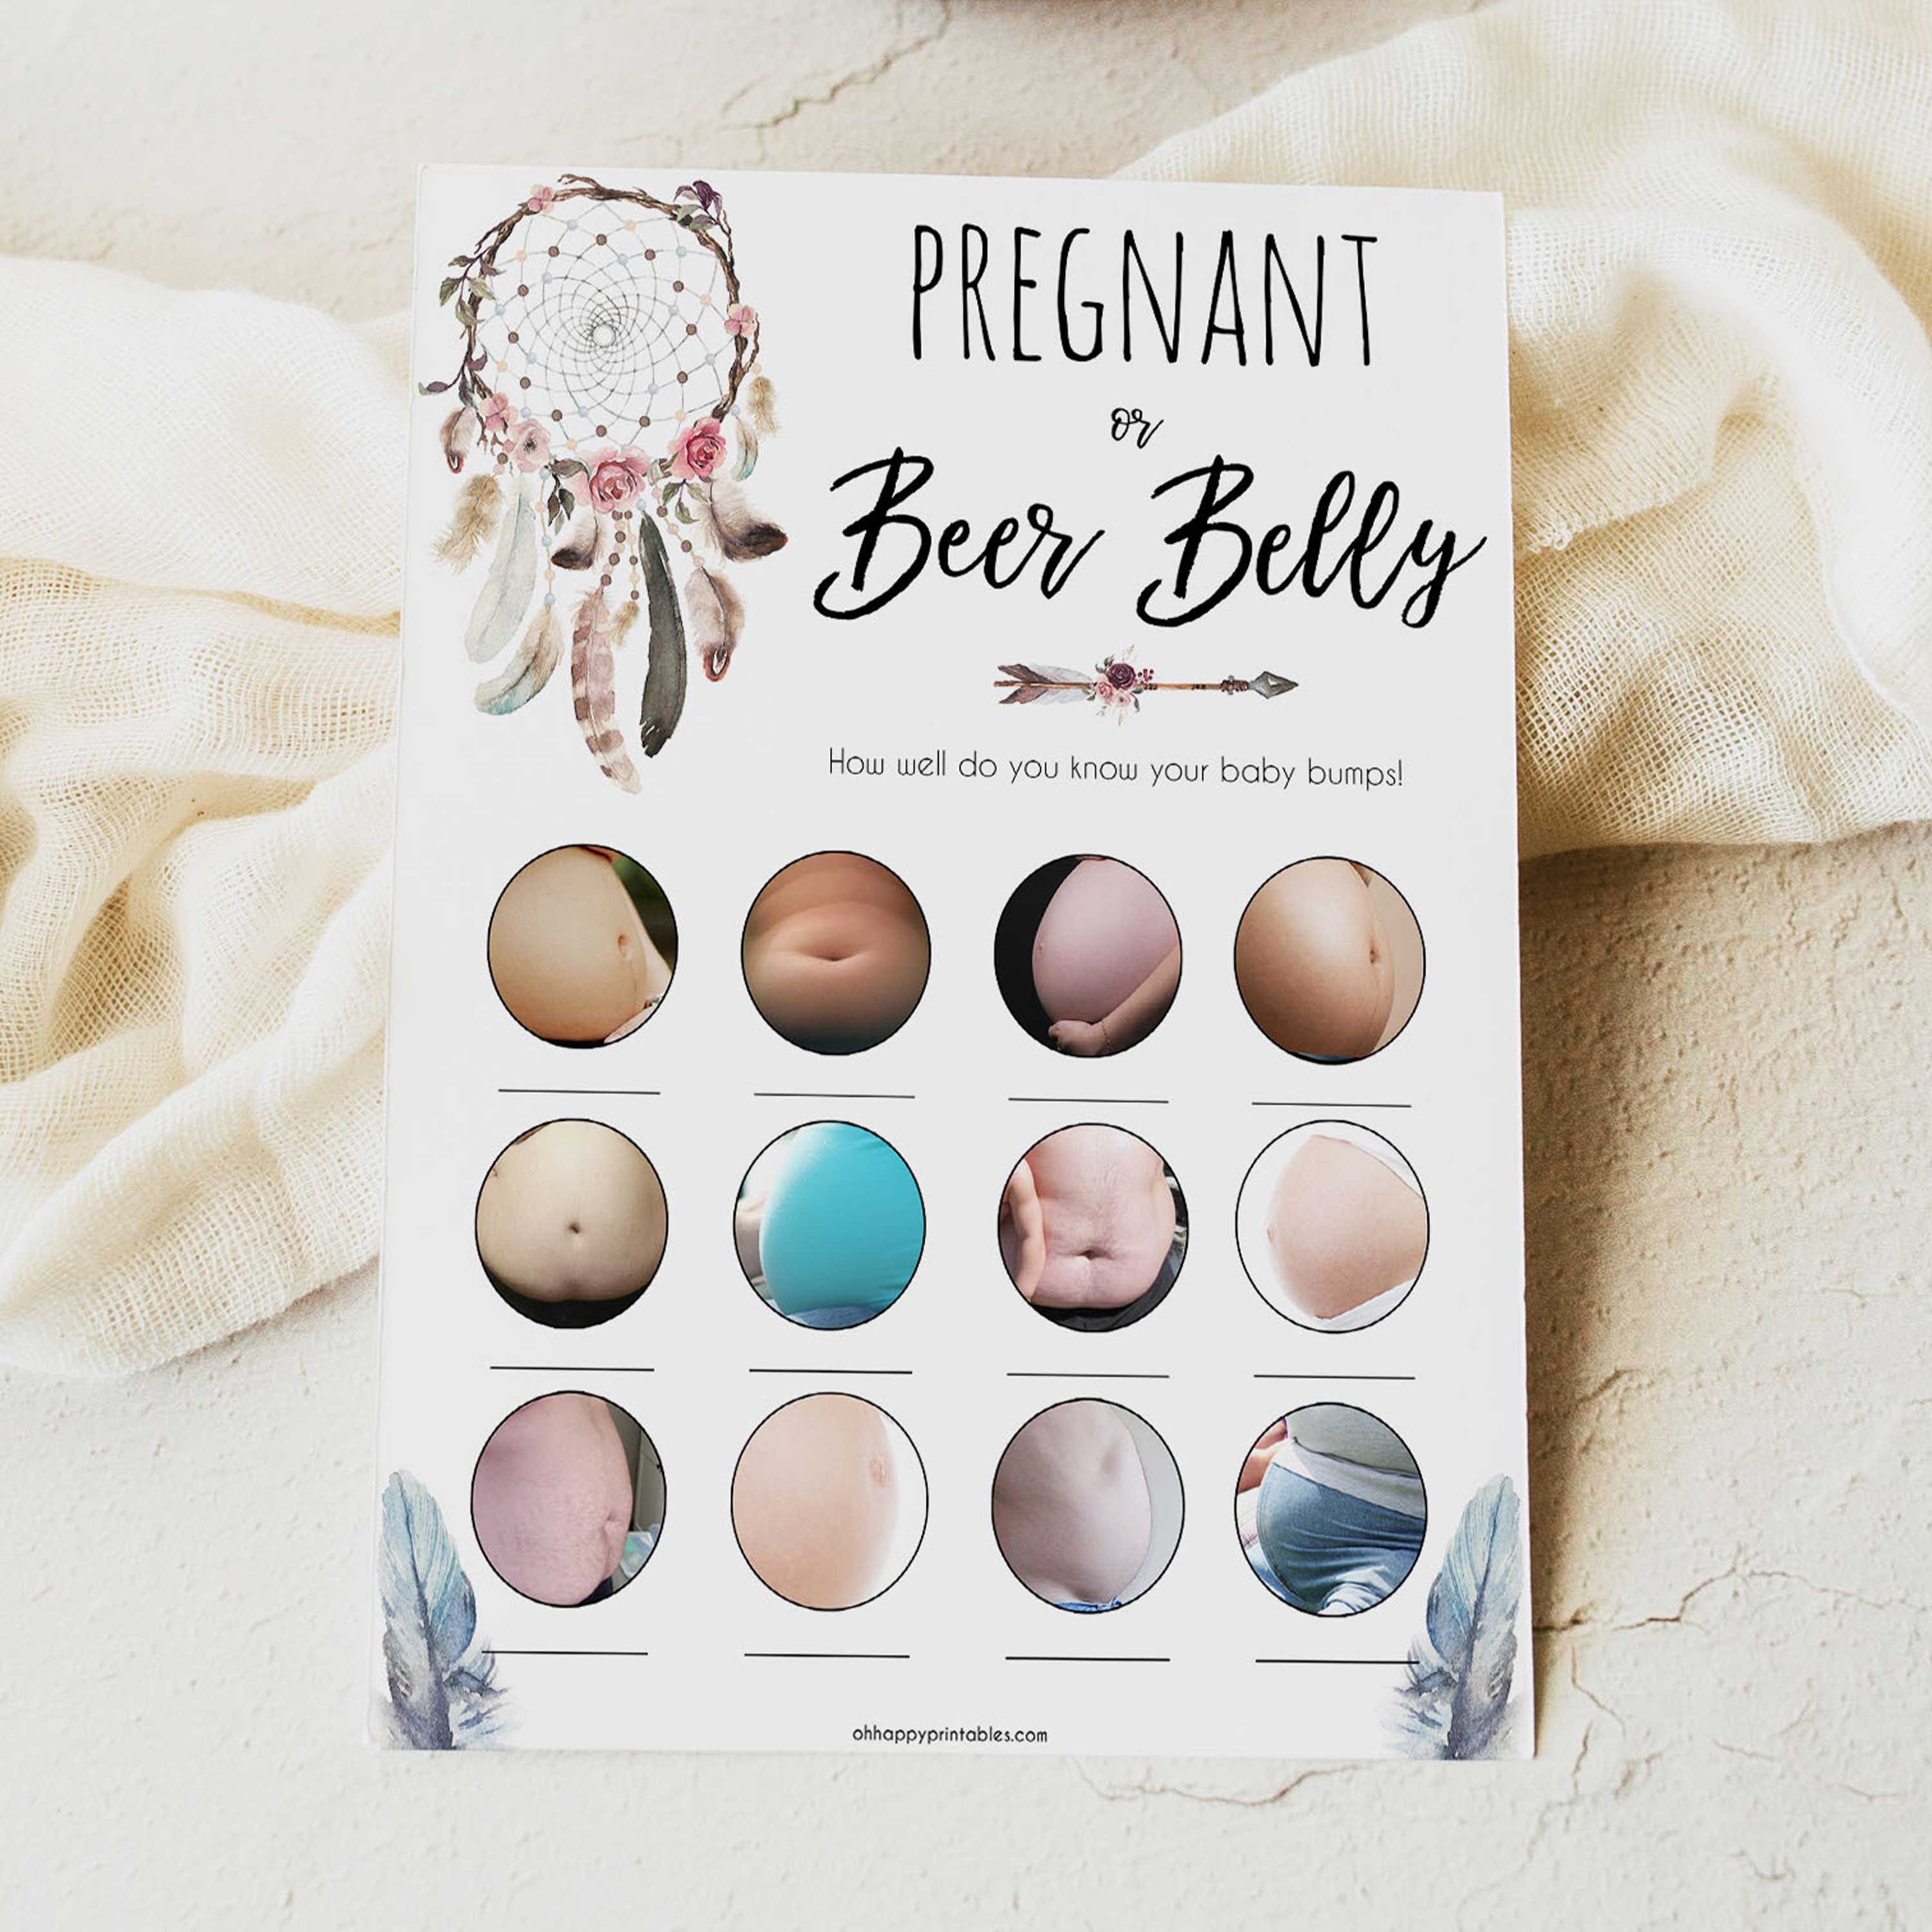 Boho baby games, pregnant or beer belly baby game, fun baby games, printable baby games, top 10 baby games, boho baby shower, baby games, hilarious baby games